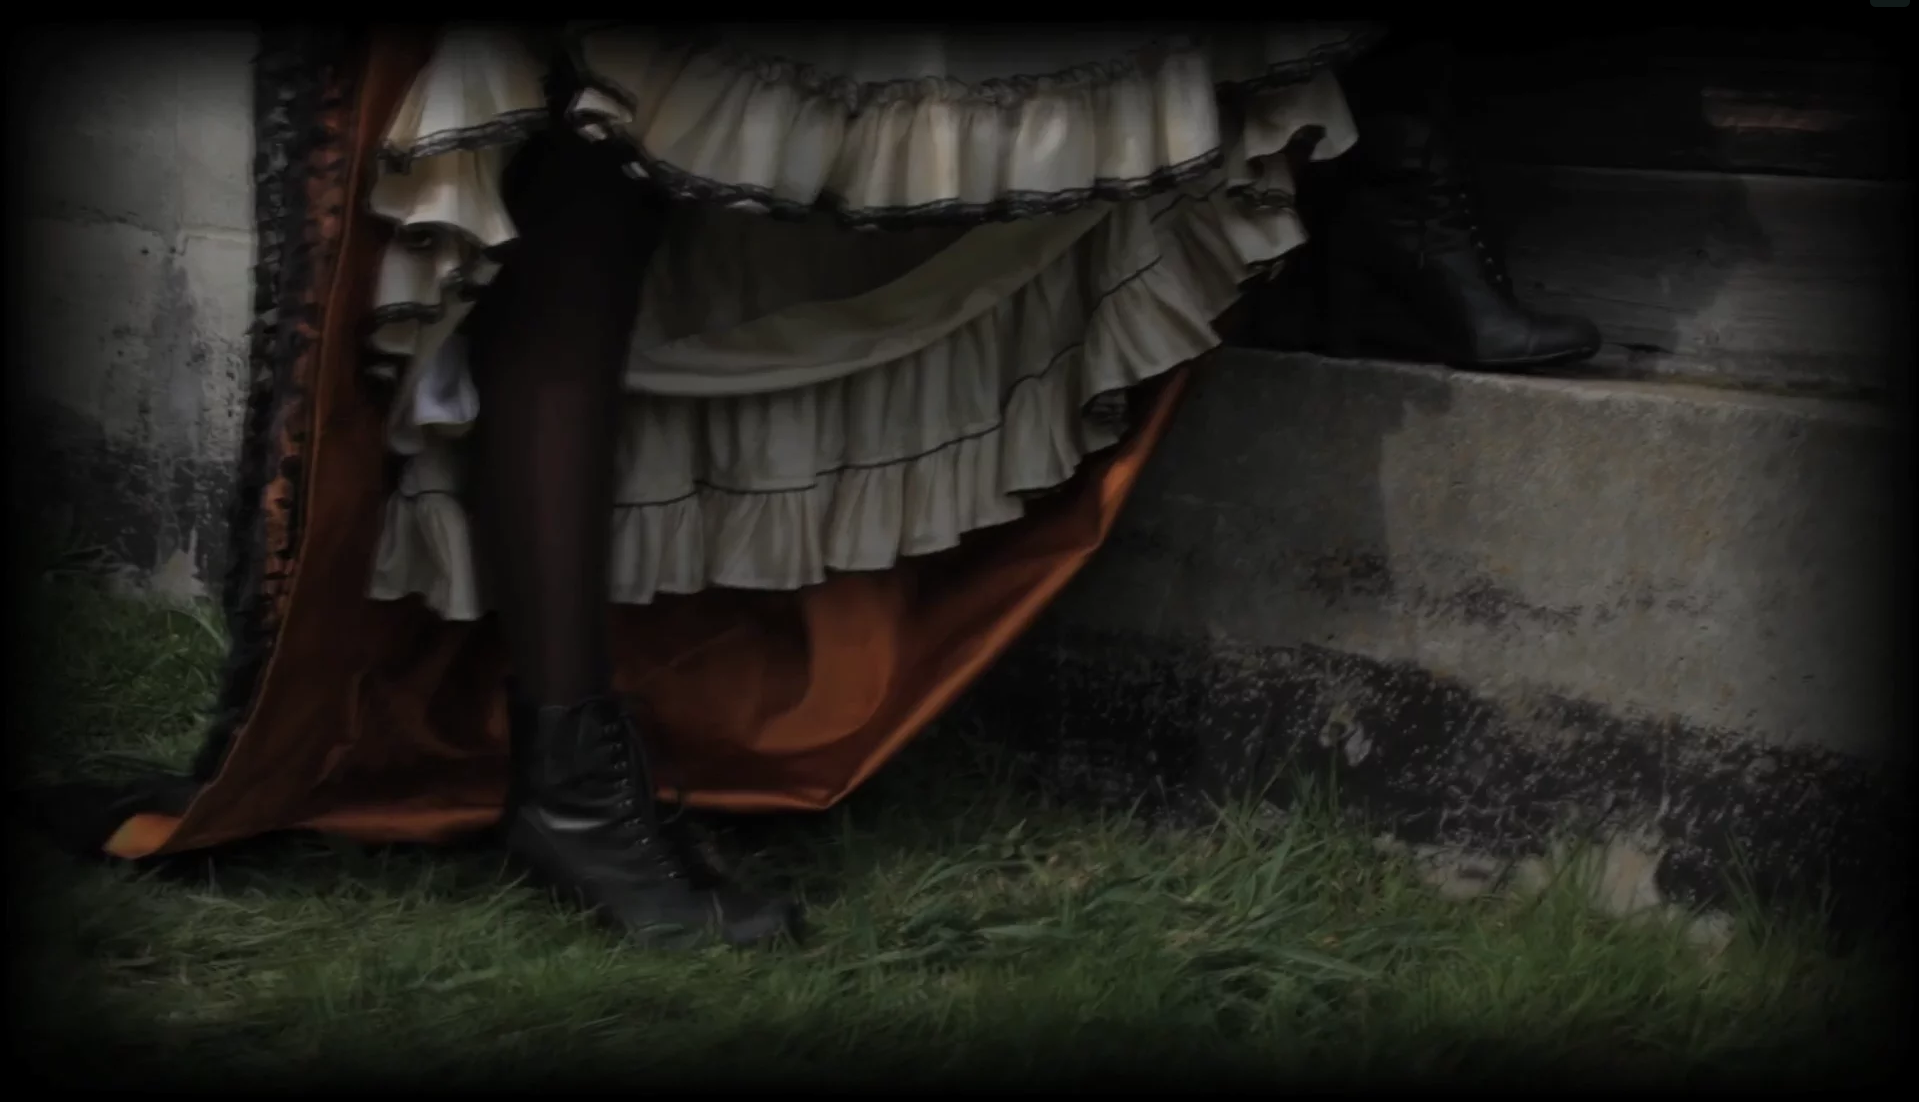 Screen capture from The Stroll: Prostitution through history